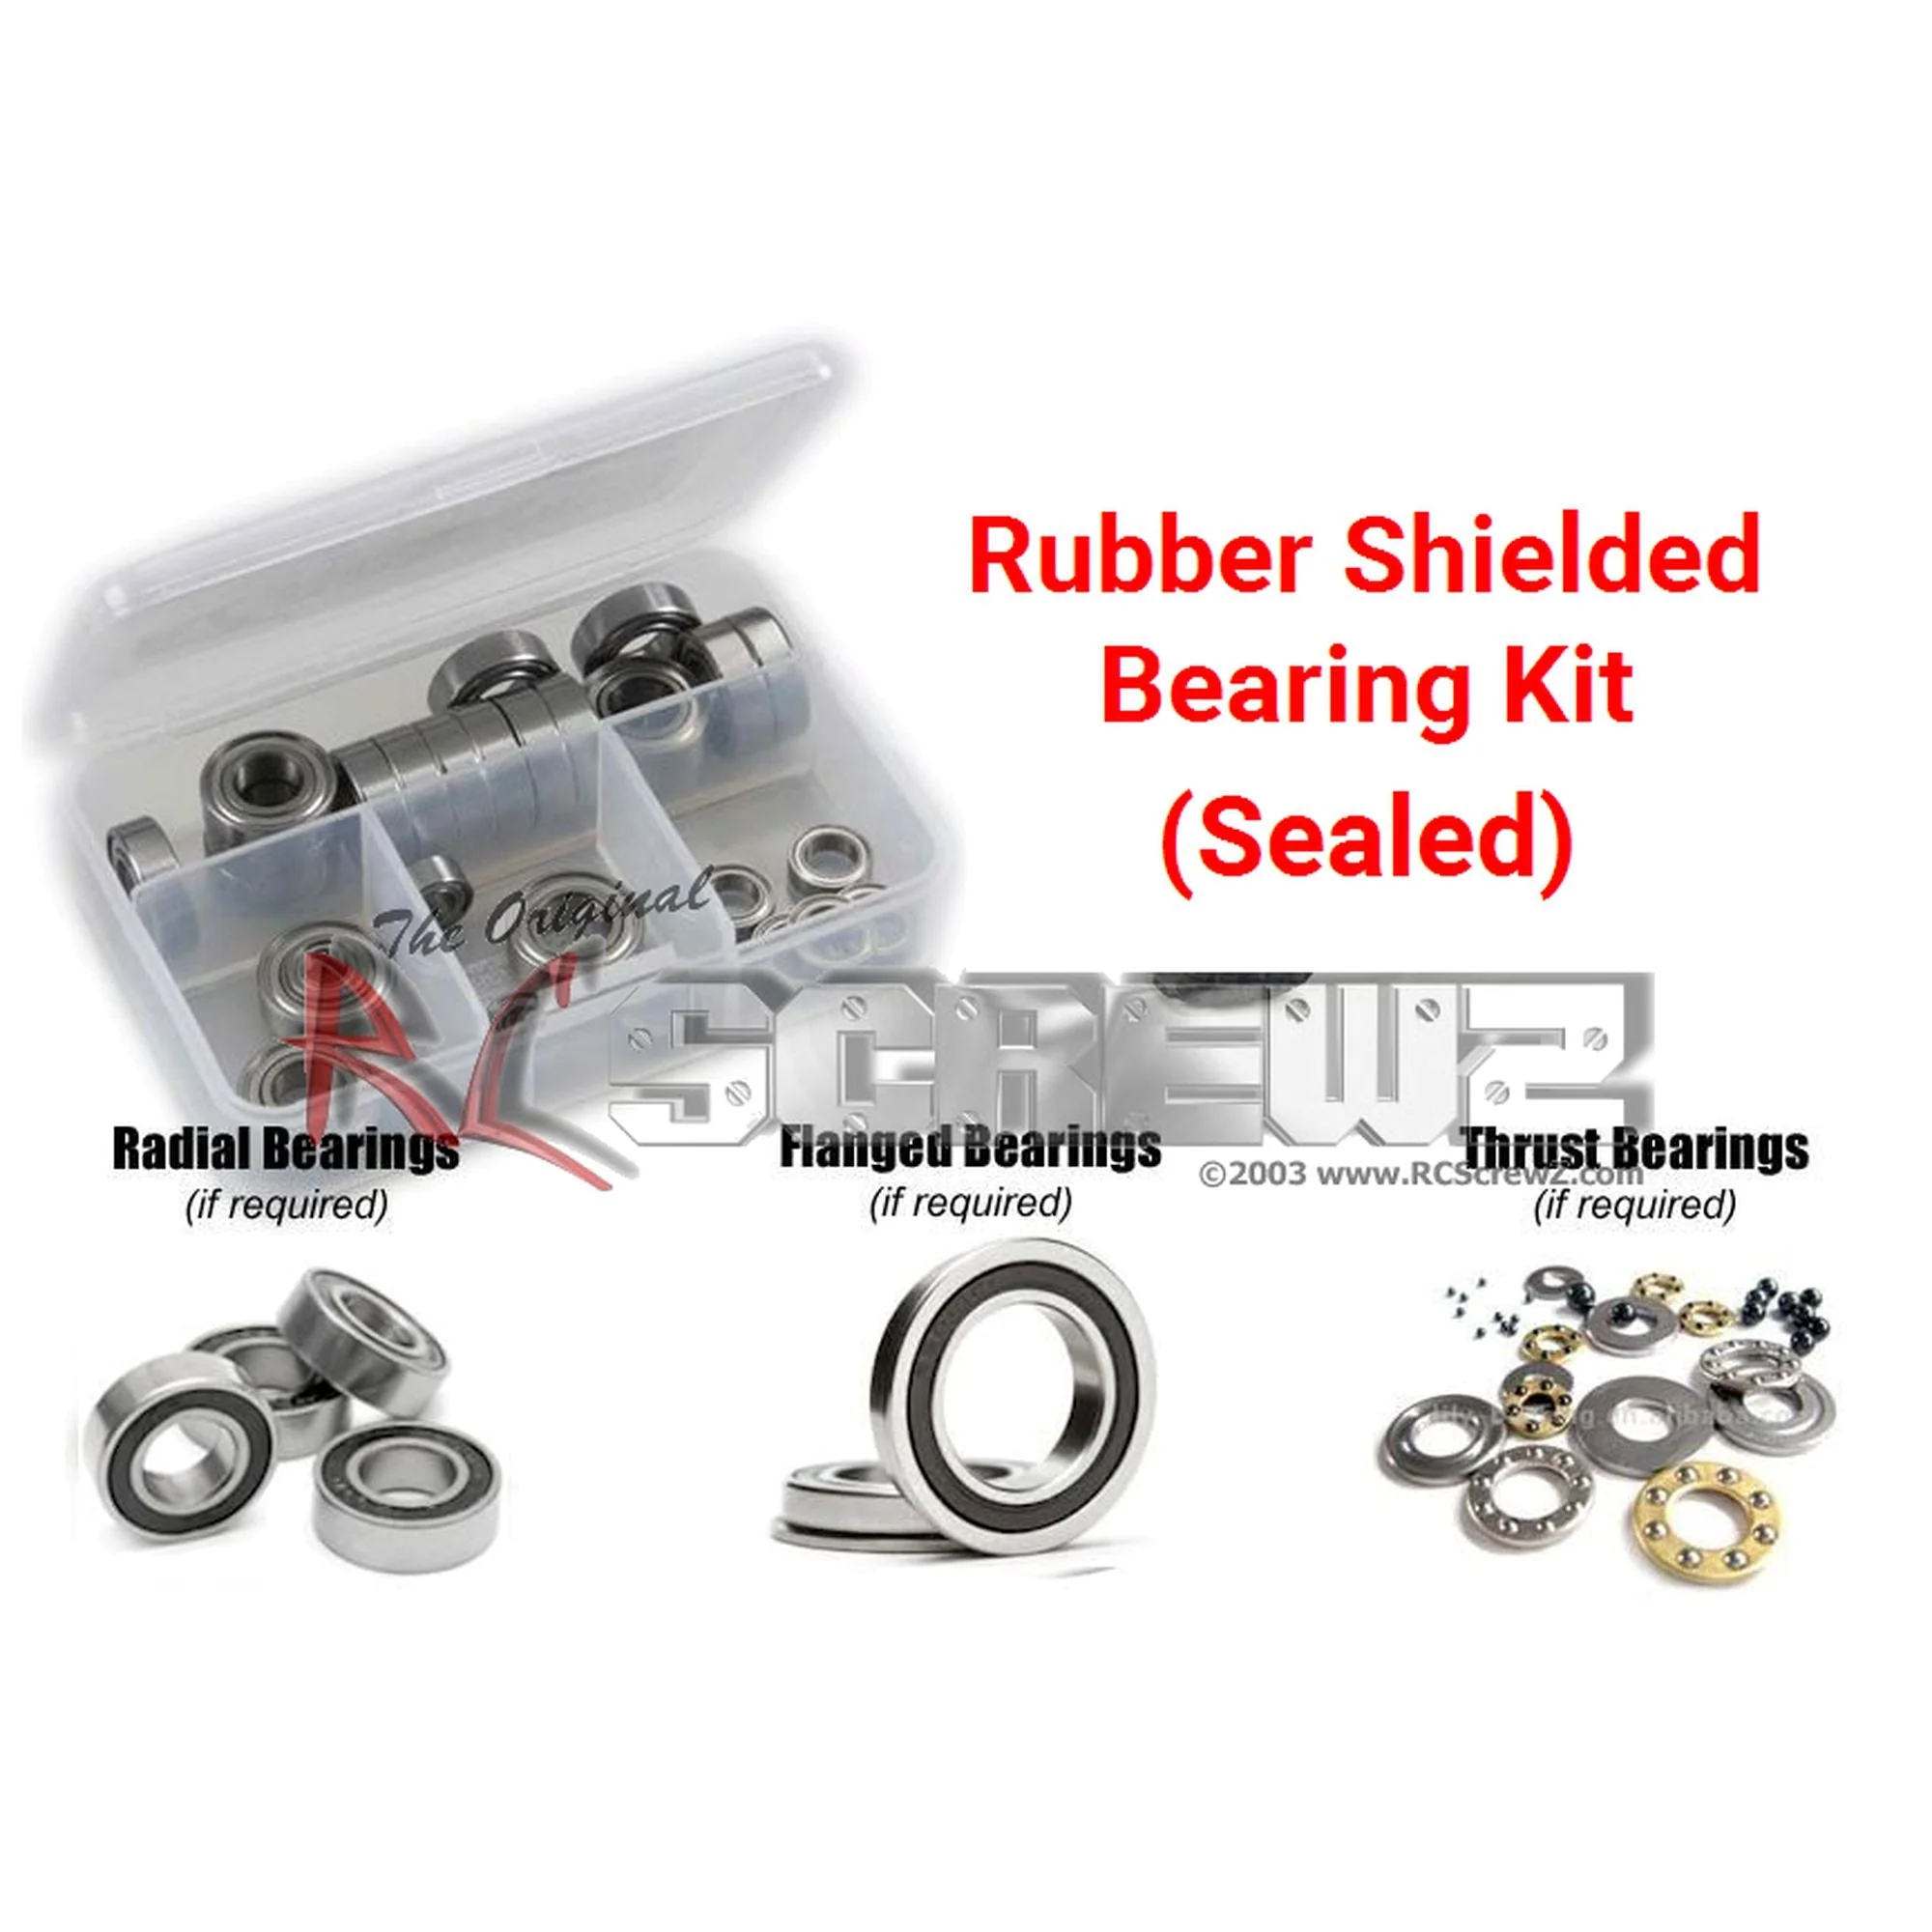 RCScrewZ Rubber Shielded Bearing Kit tam131r for Tamiya Monster Beetle #58060 - Picture 1 of 12